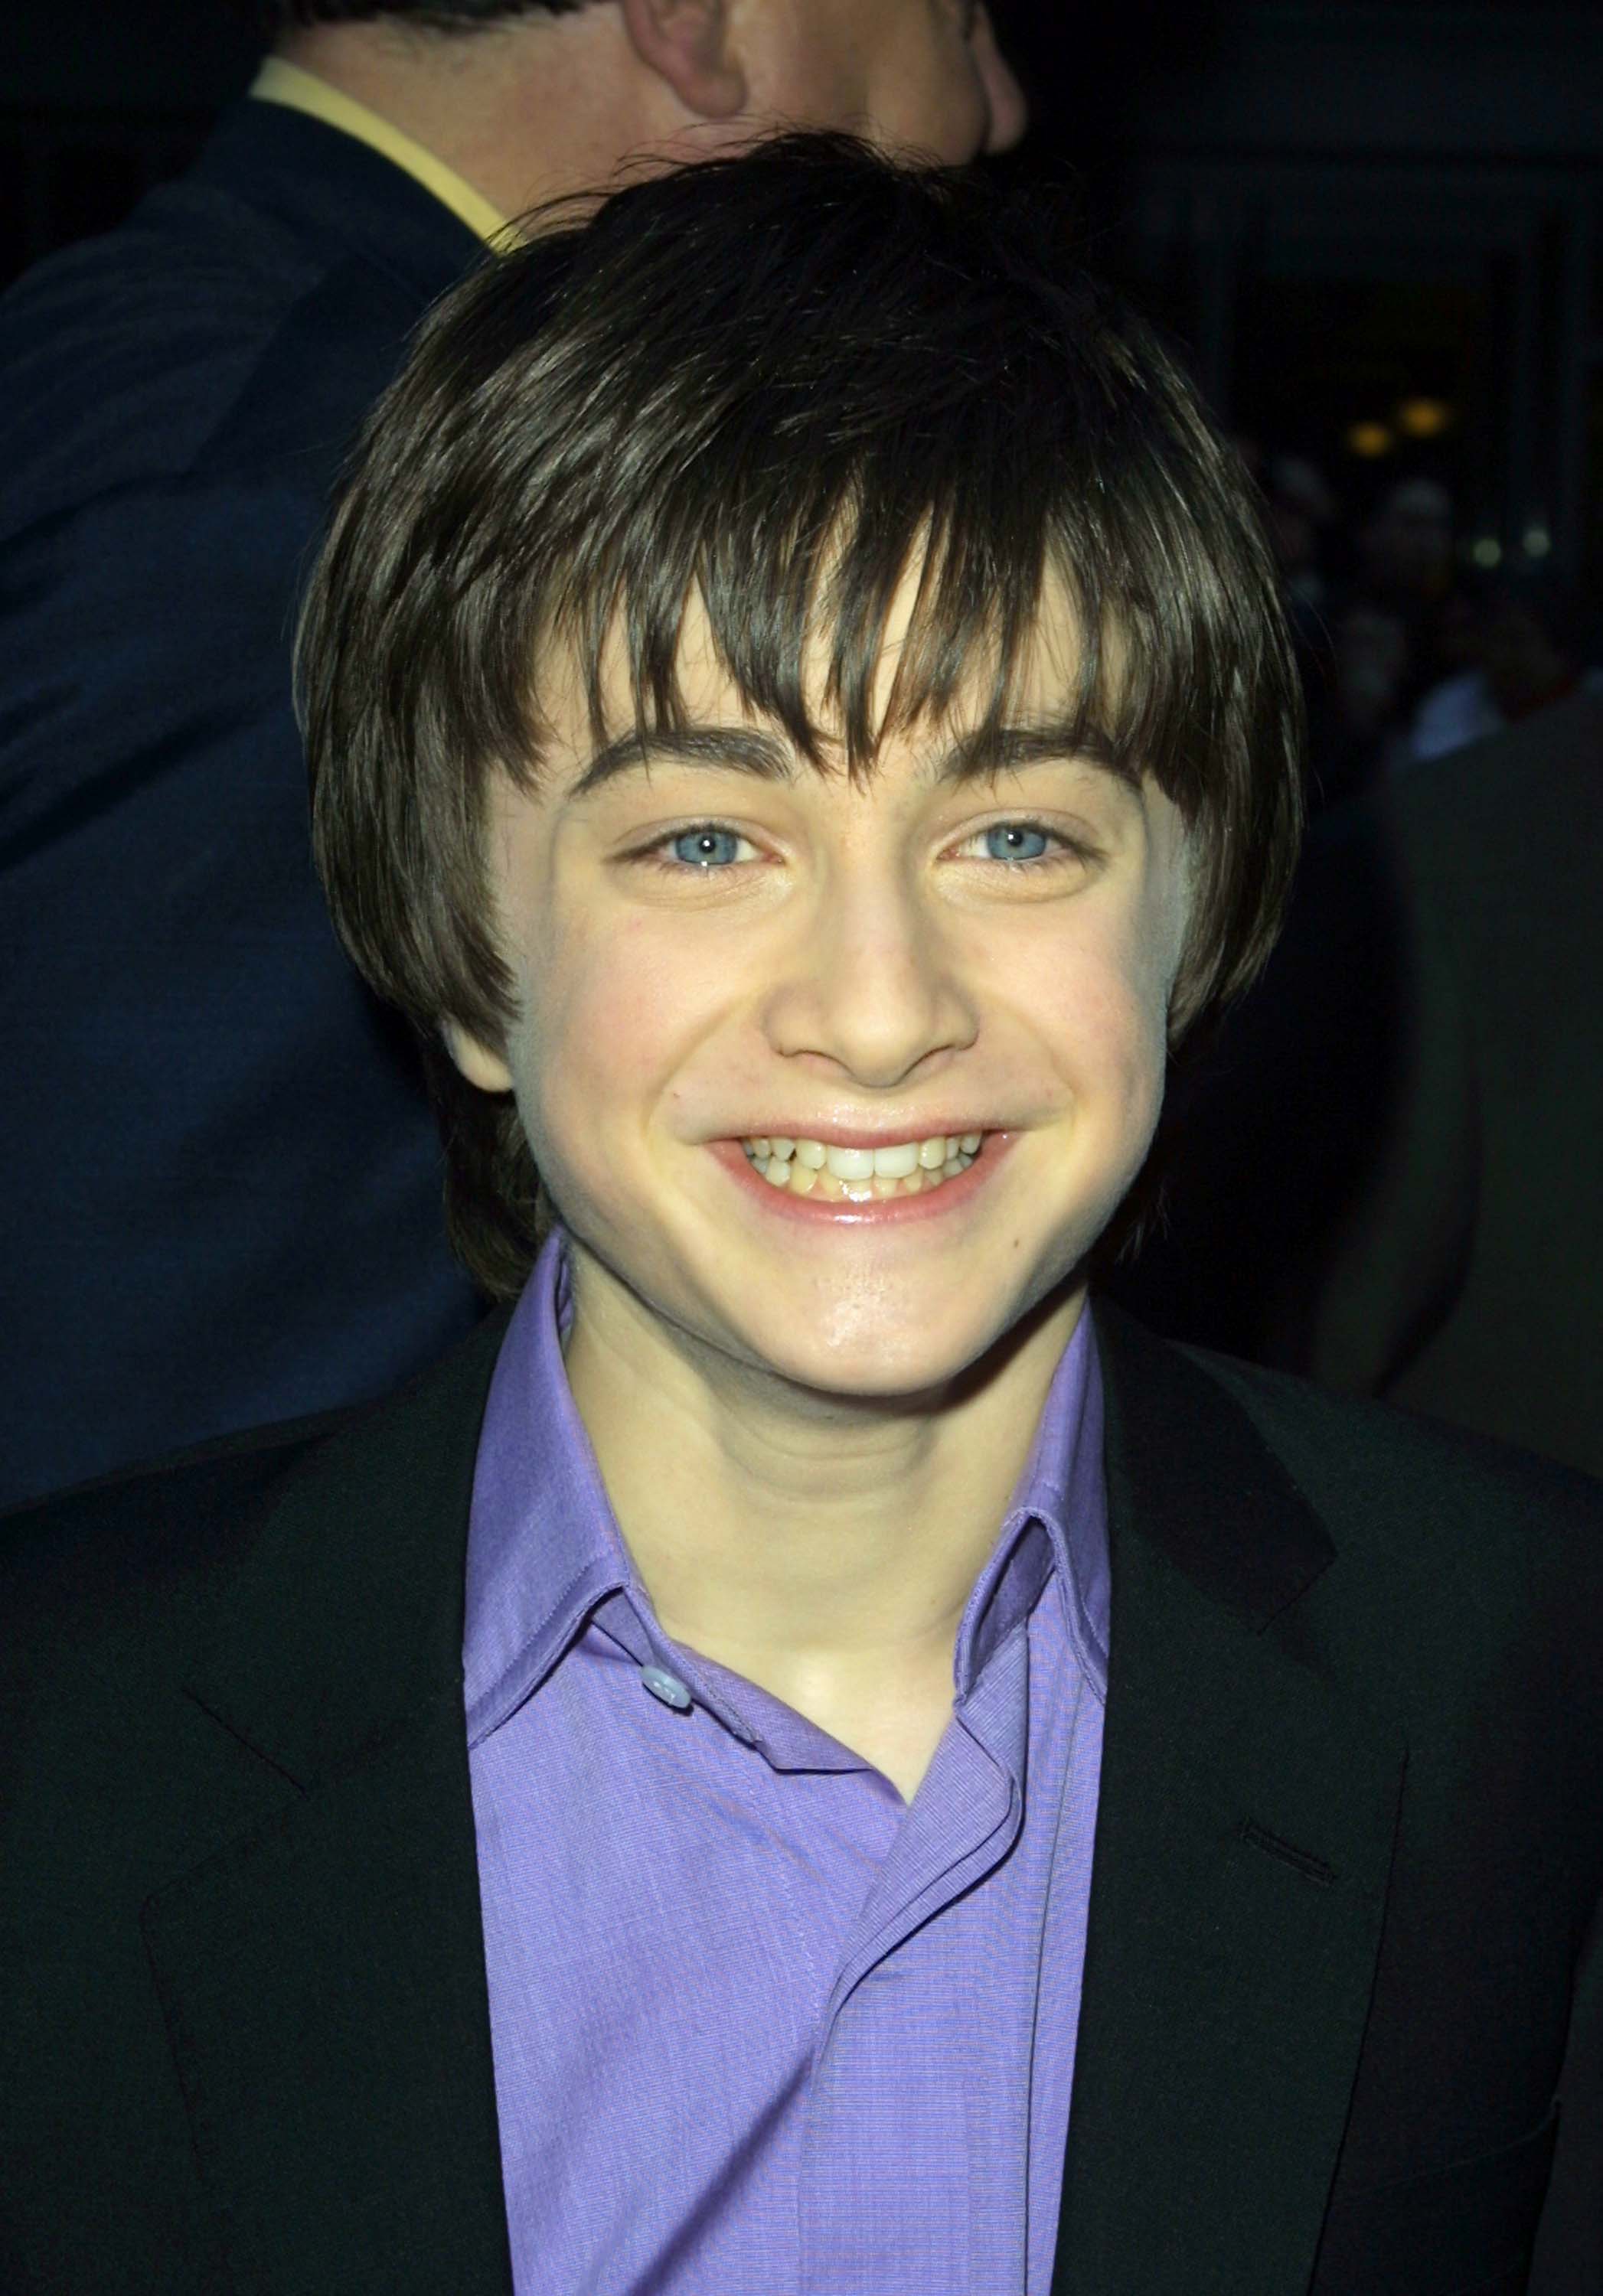 Daniel Radcliffe at the New York premiere of "Harry Potter and The Sorcerer's Stone" on November 11, 2001. | Source: Getty Images